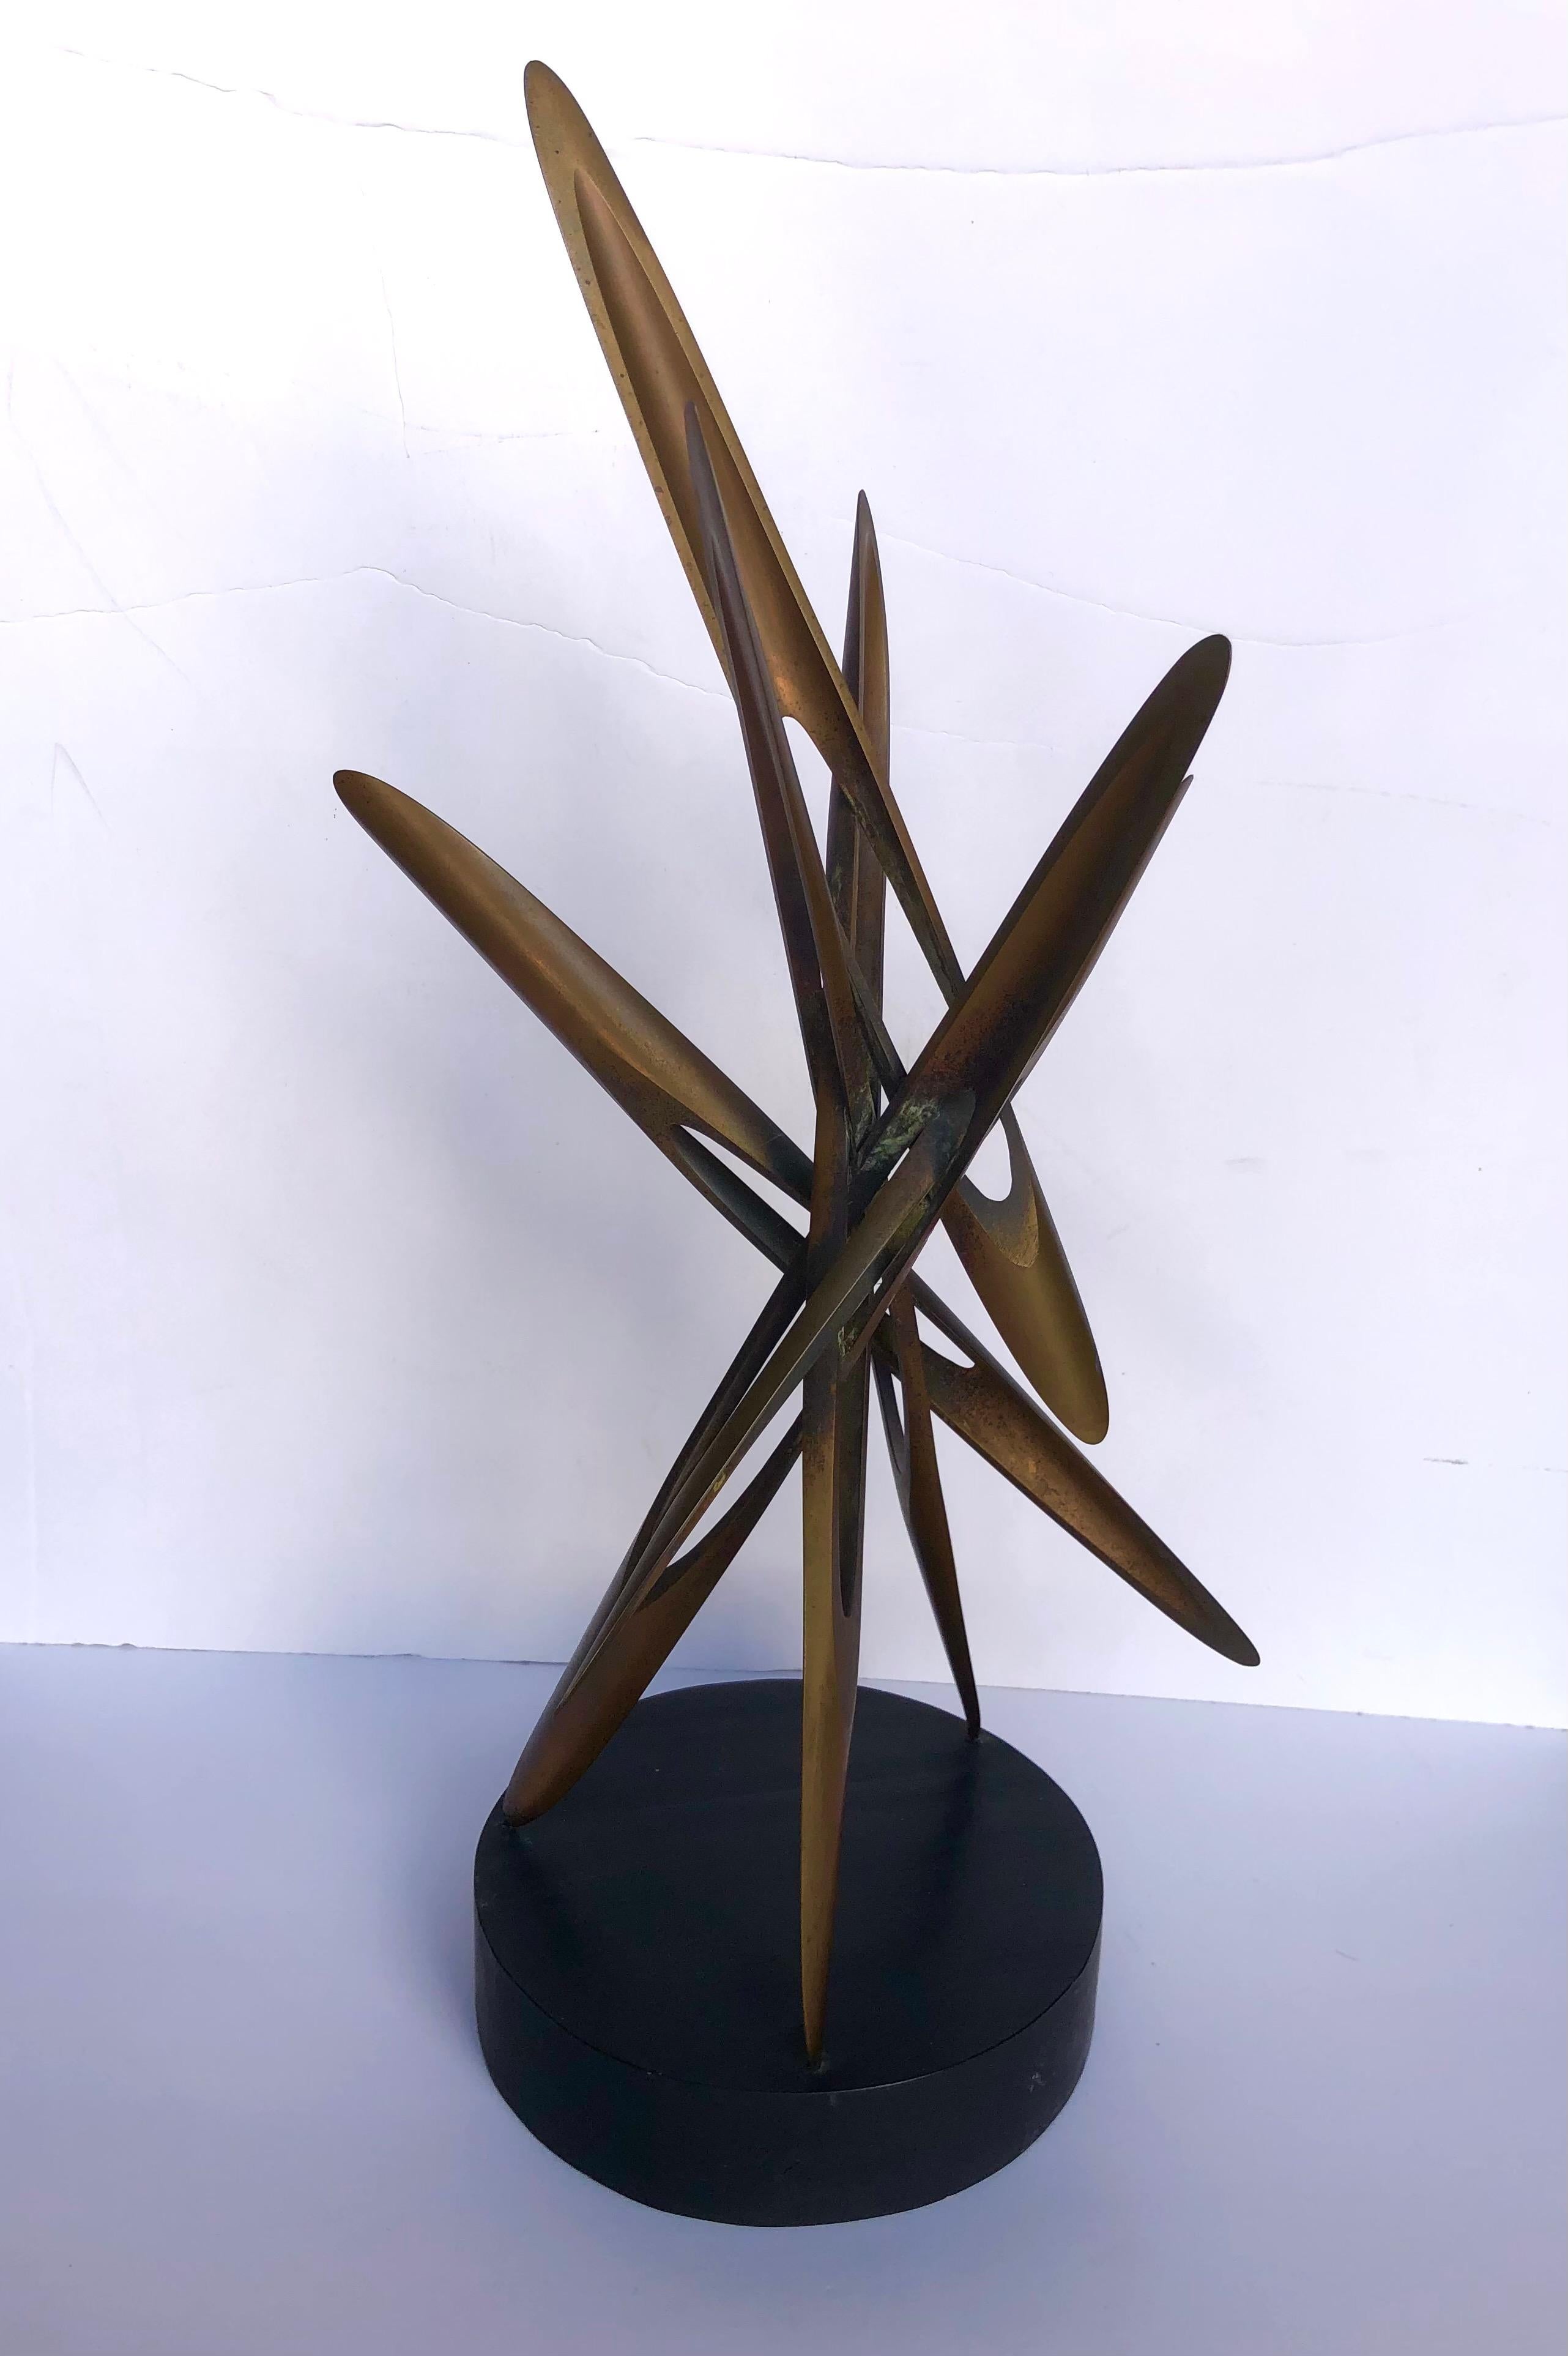 c. 1960s, American, high quality cast and welded bronze, mounted on round black wood base, unsigned.